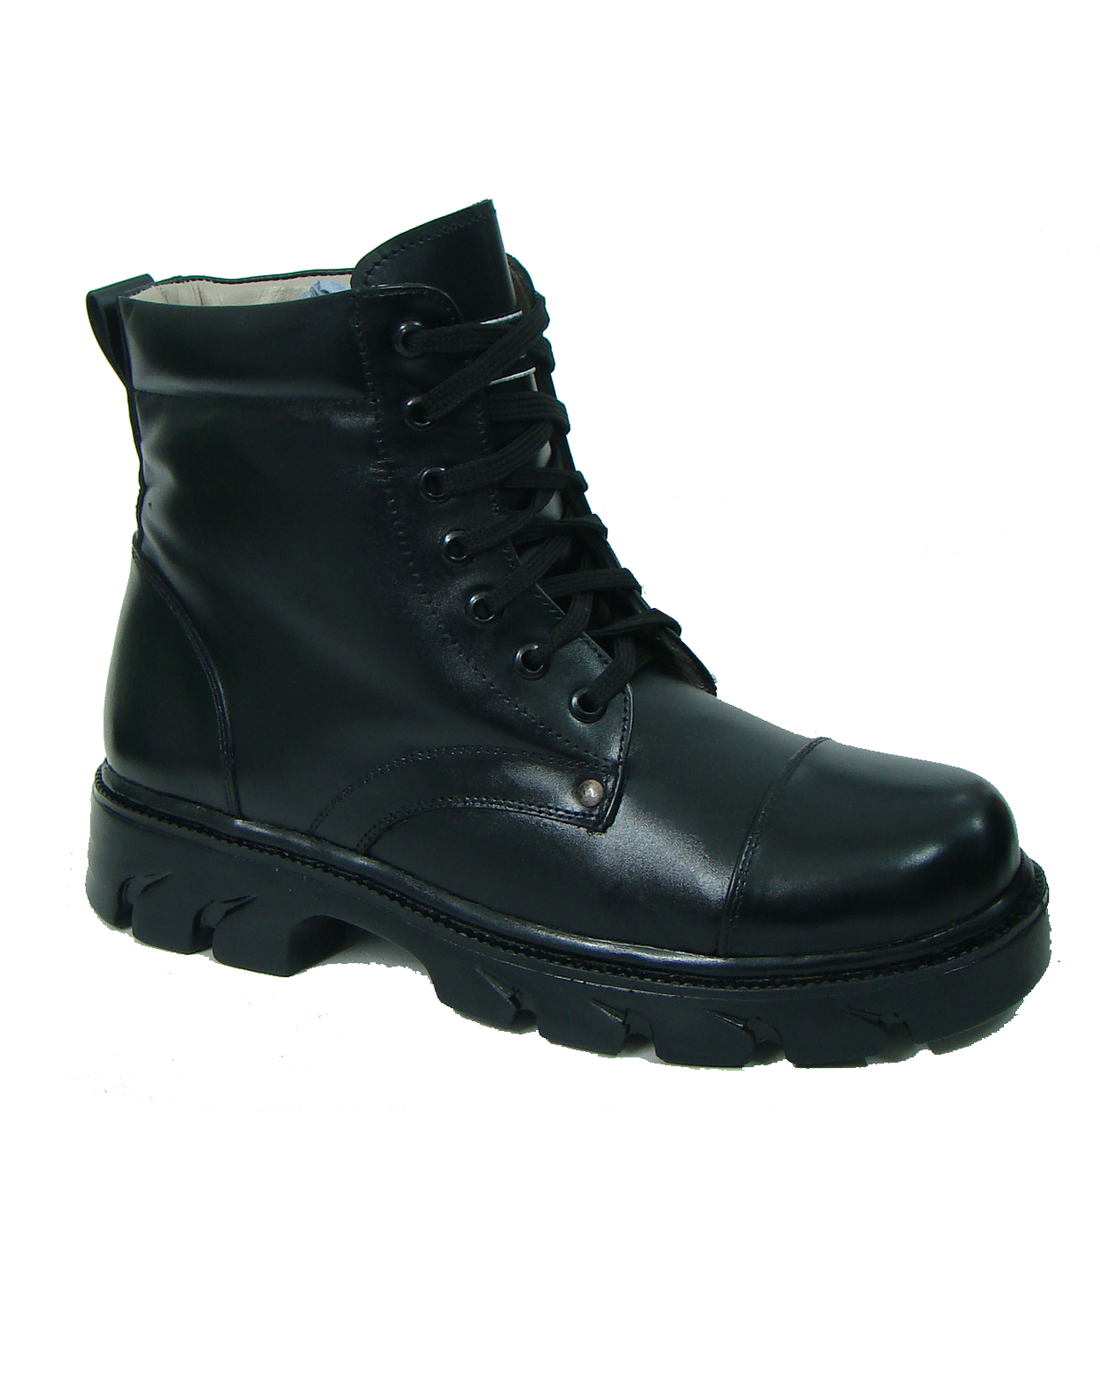 HAMMER KING SAFETY SHOES HK13009 Hammer King's Safety Shoe/Boots Safety  Equipment Melaka, Malaysia Supplier, Suppliers,